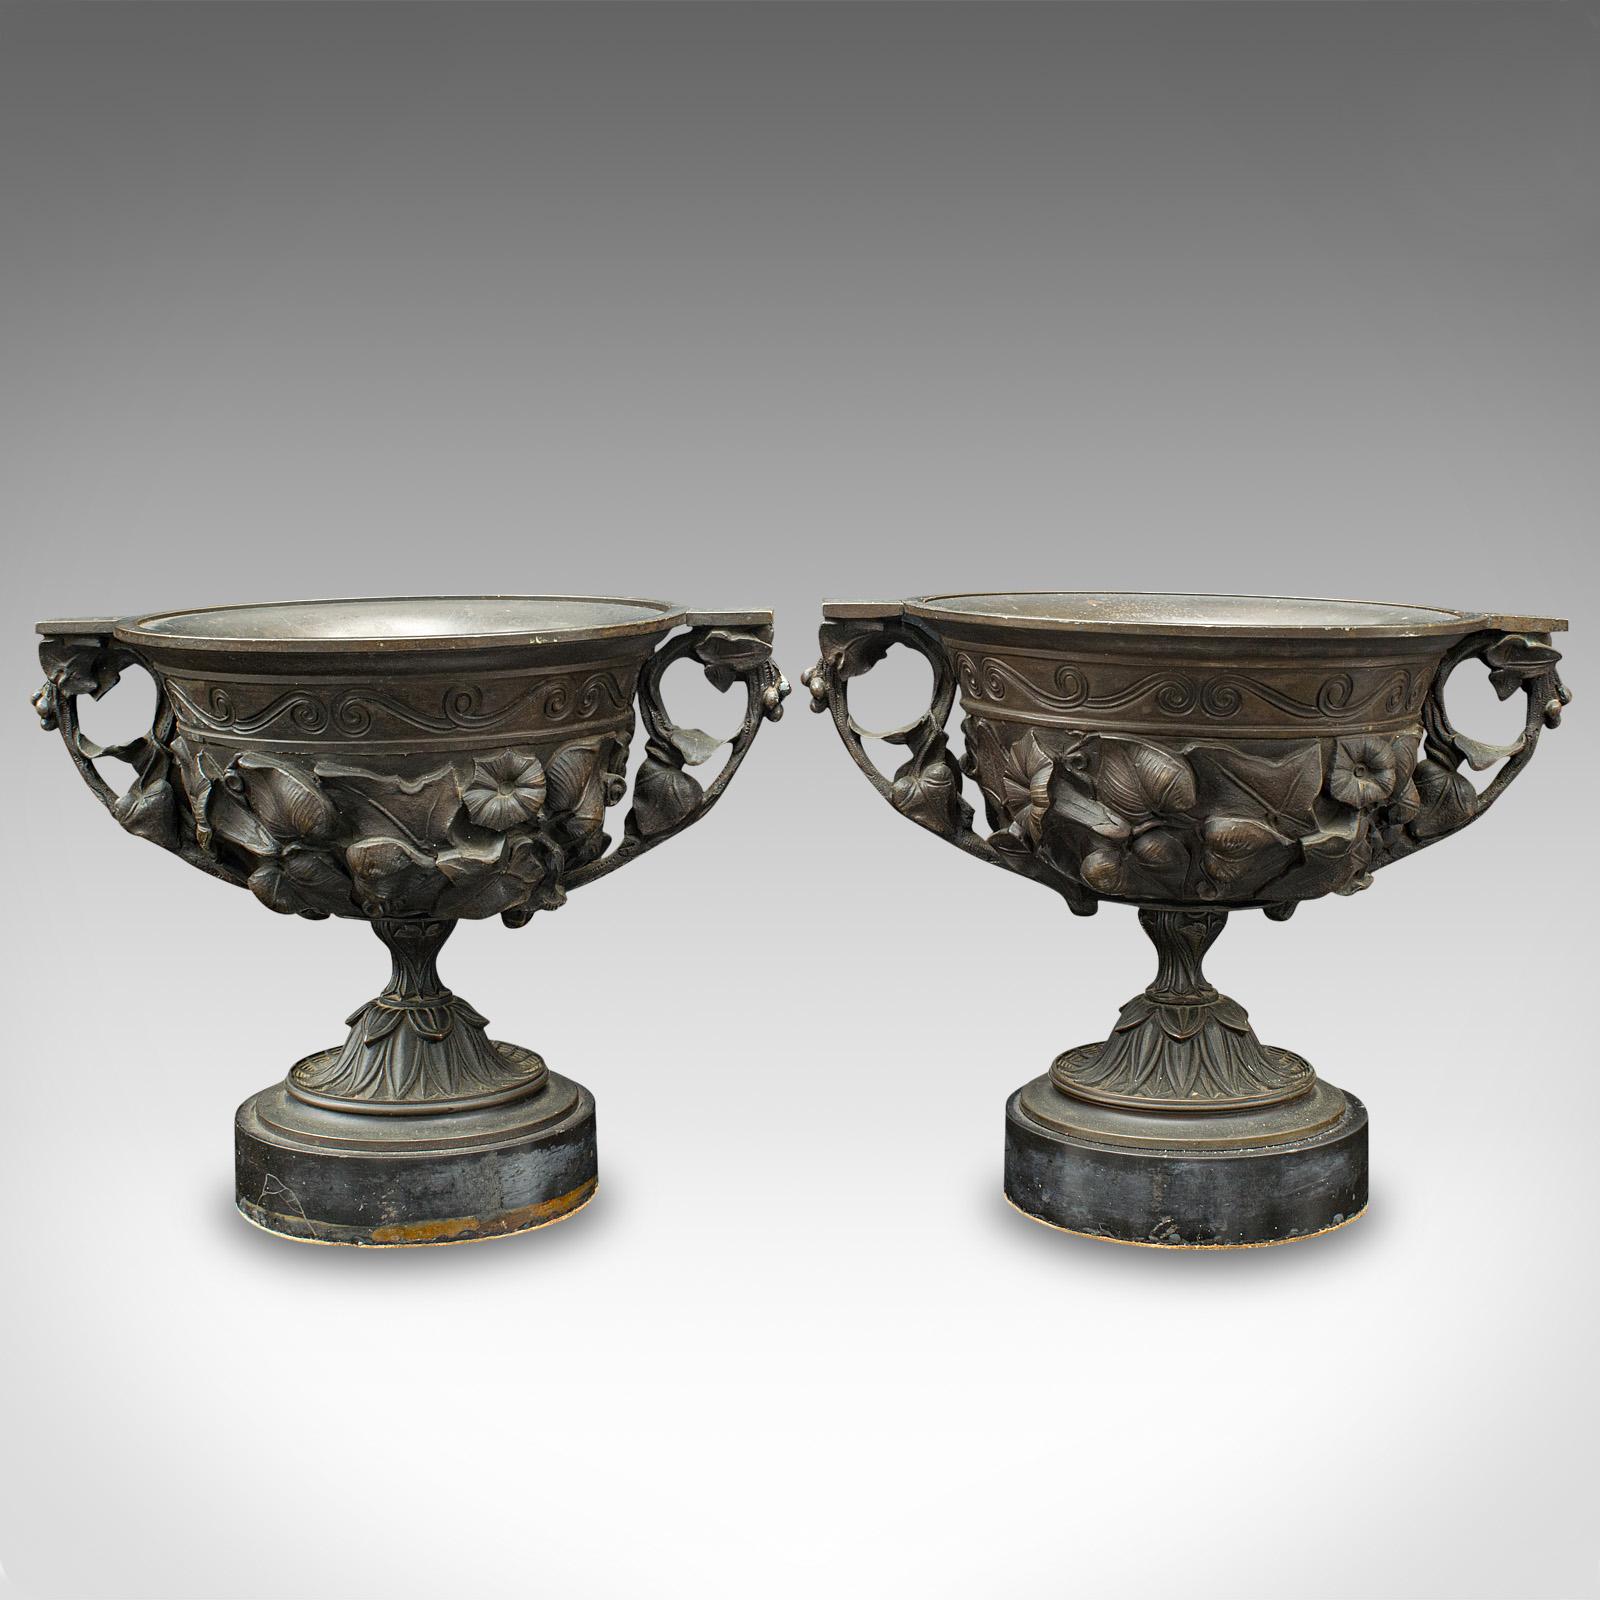 This is a large pair of antique drinking cups. An Italian, bronze over marble decorative goblet in Grand Tour taste, dating to the Victorian period, circa 1850.

Fine example of relief decor, from the days of the Grand Tour
Displaying a desirable